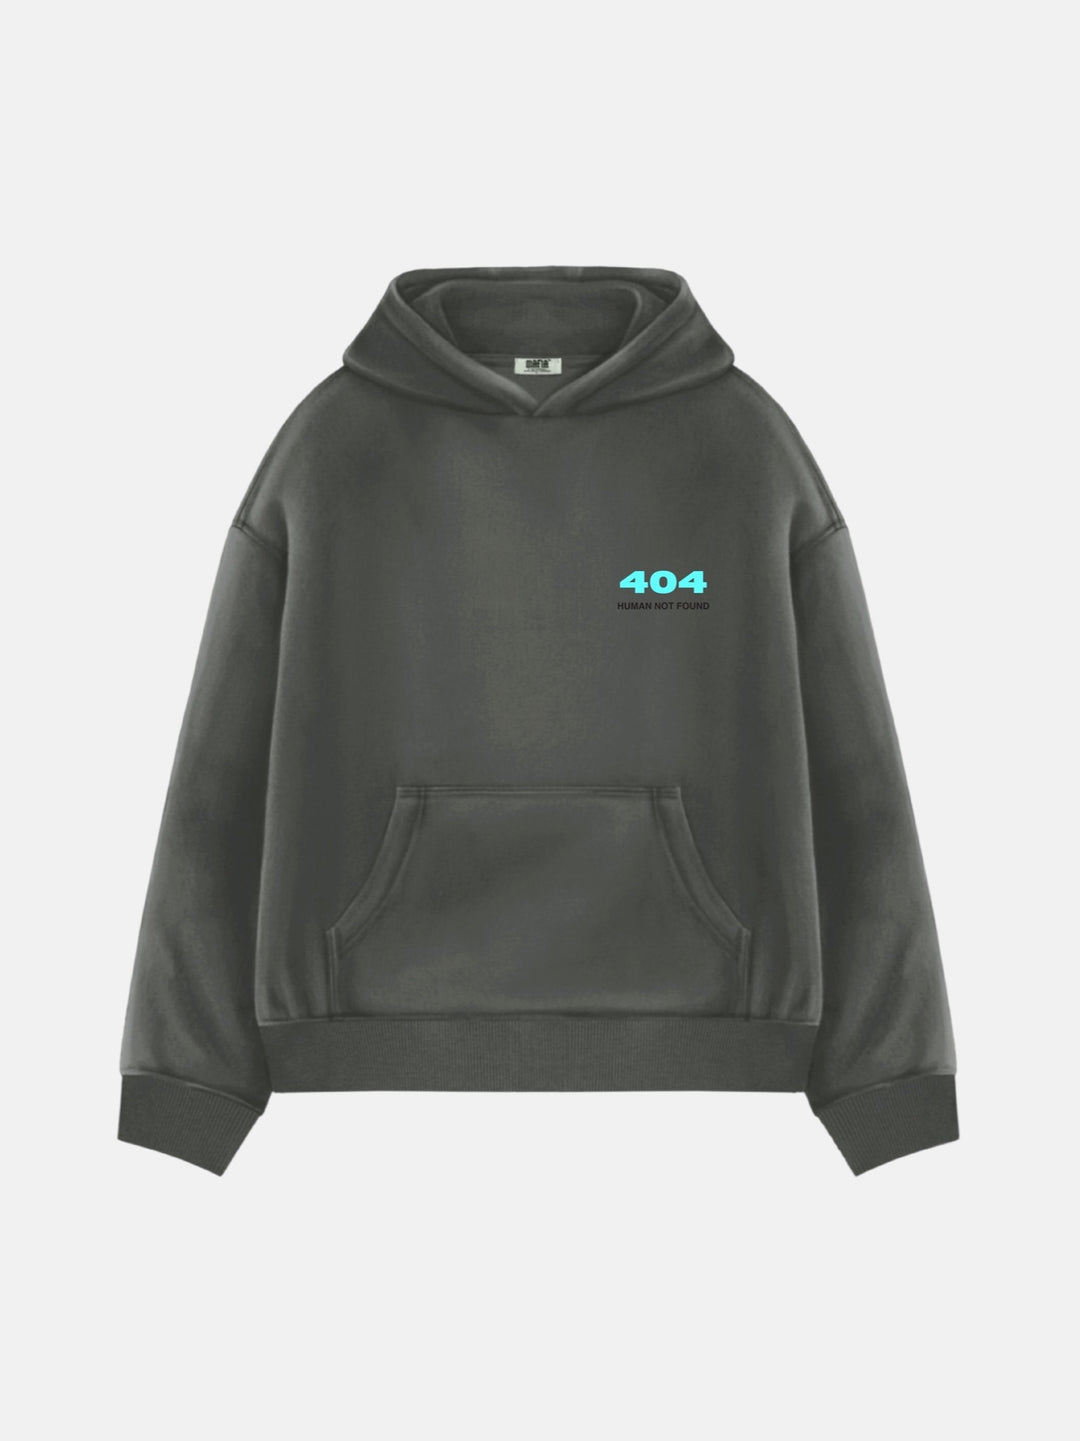 Oversize 404 Hoodie - Anthracite